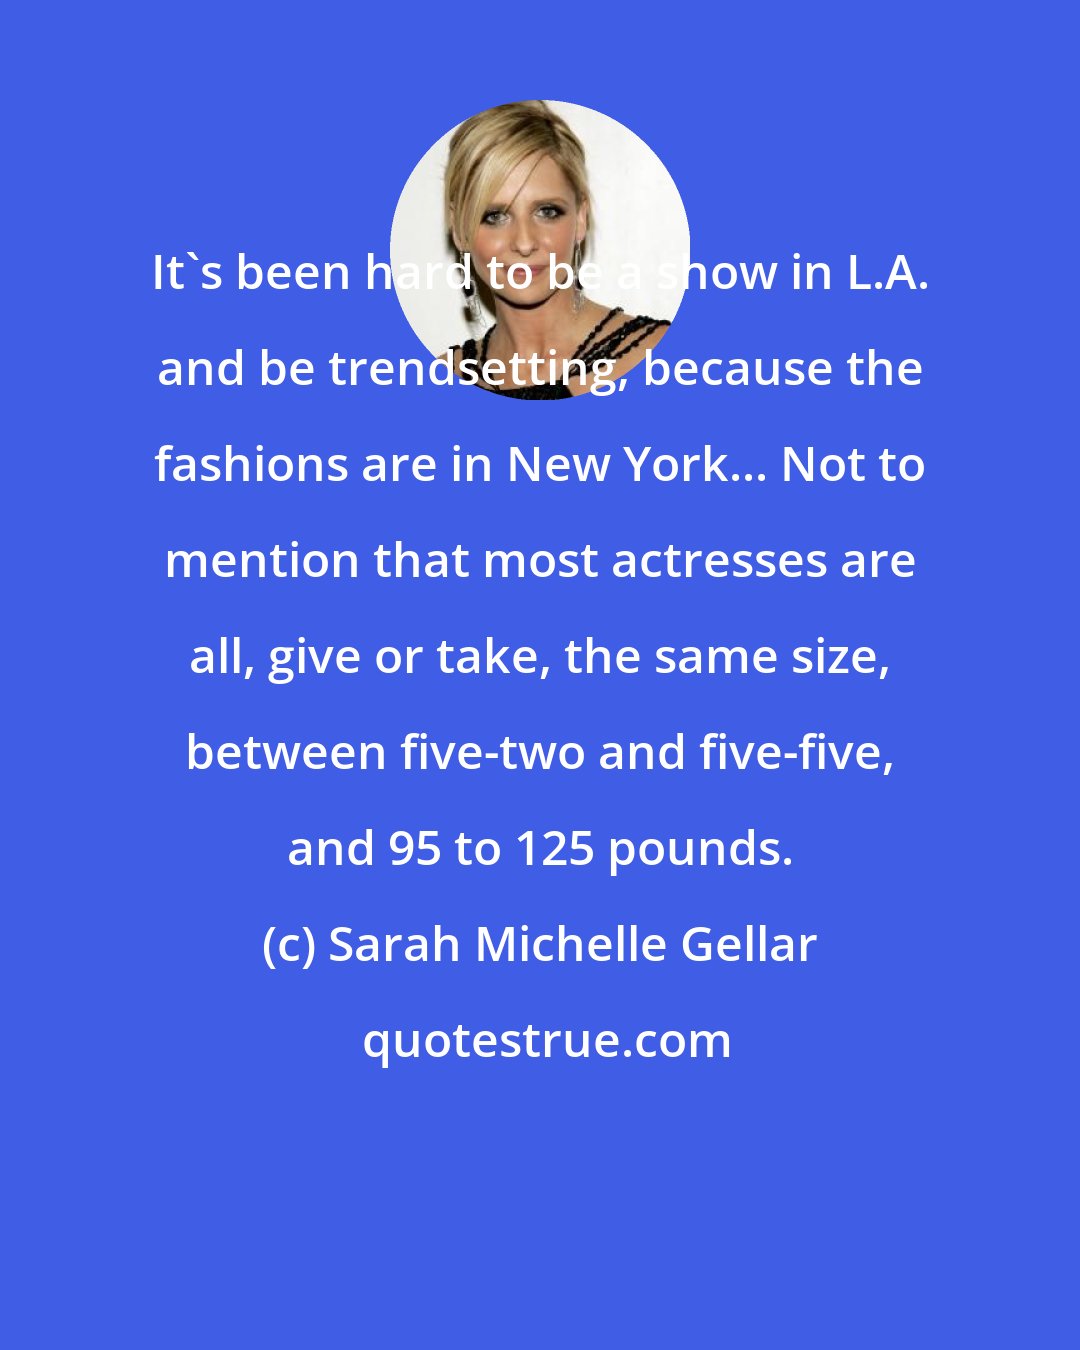 Sarah Michelle Gellar: It's been hard to be a show in L.A. and be trendsetting, because the fashions are in New York... Not to mention that most actresses are all, give or take, the same size, between five-two and five-five, and 95 to 125 pounds.